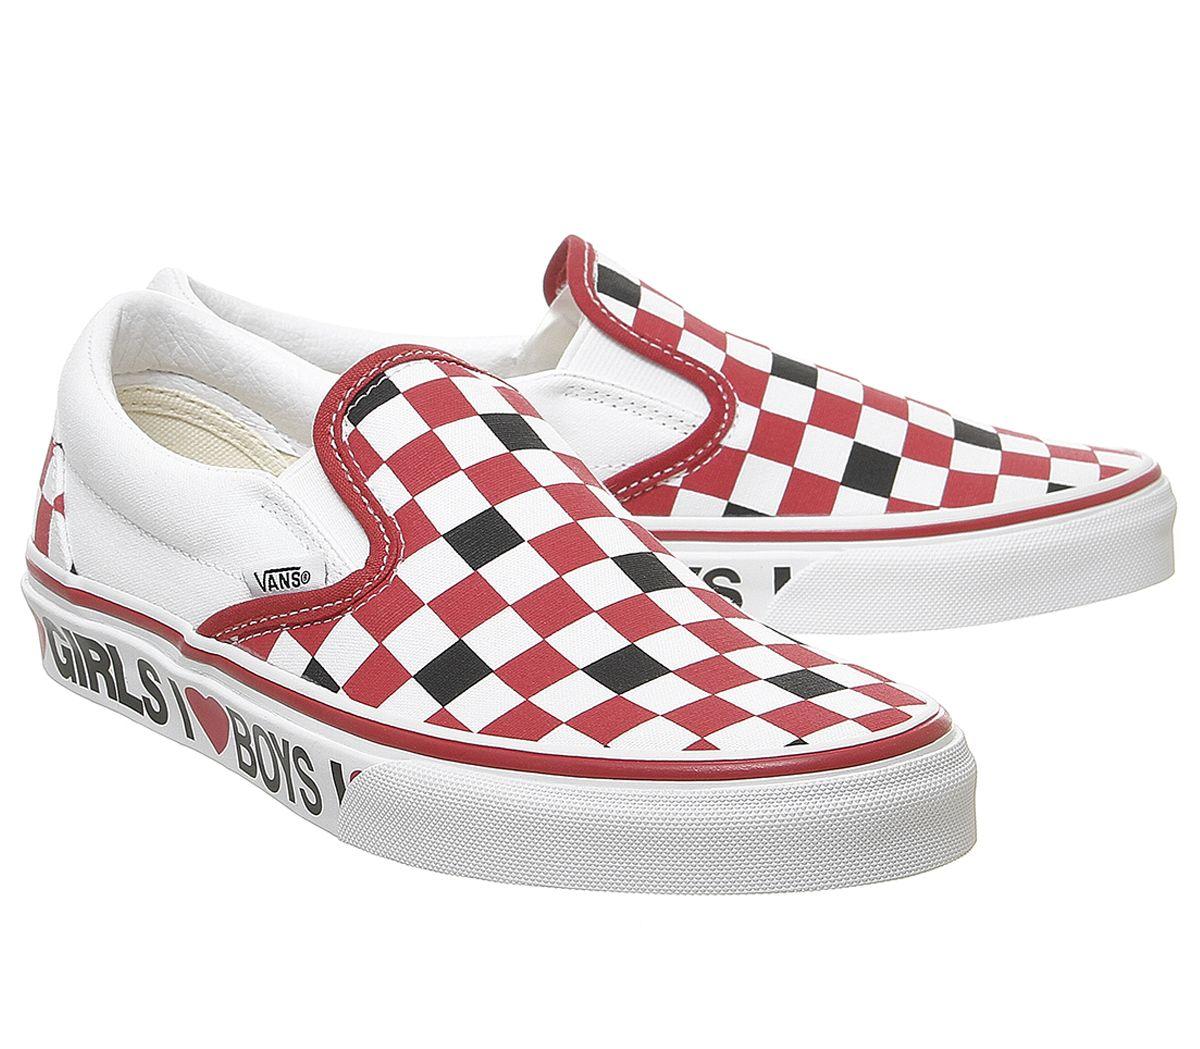 Vans Rubber Classic Slip On Trainers in Red - Lyst